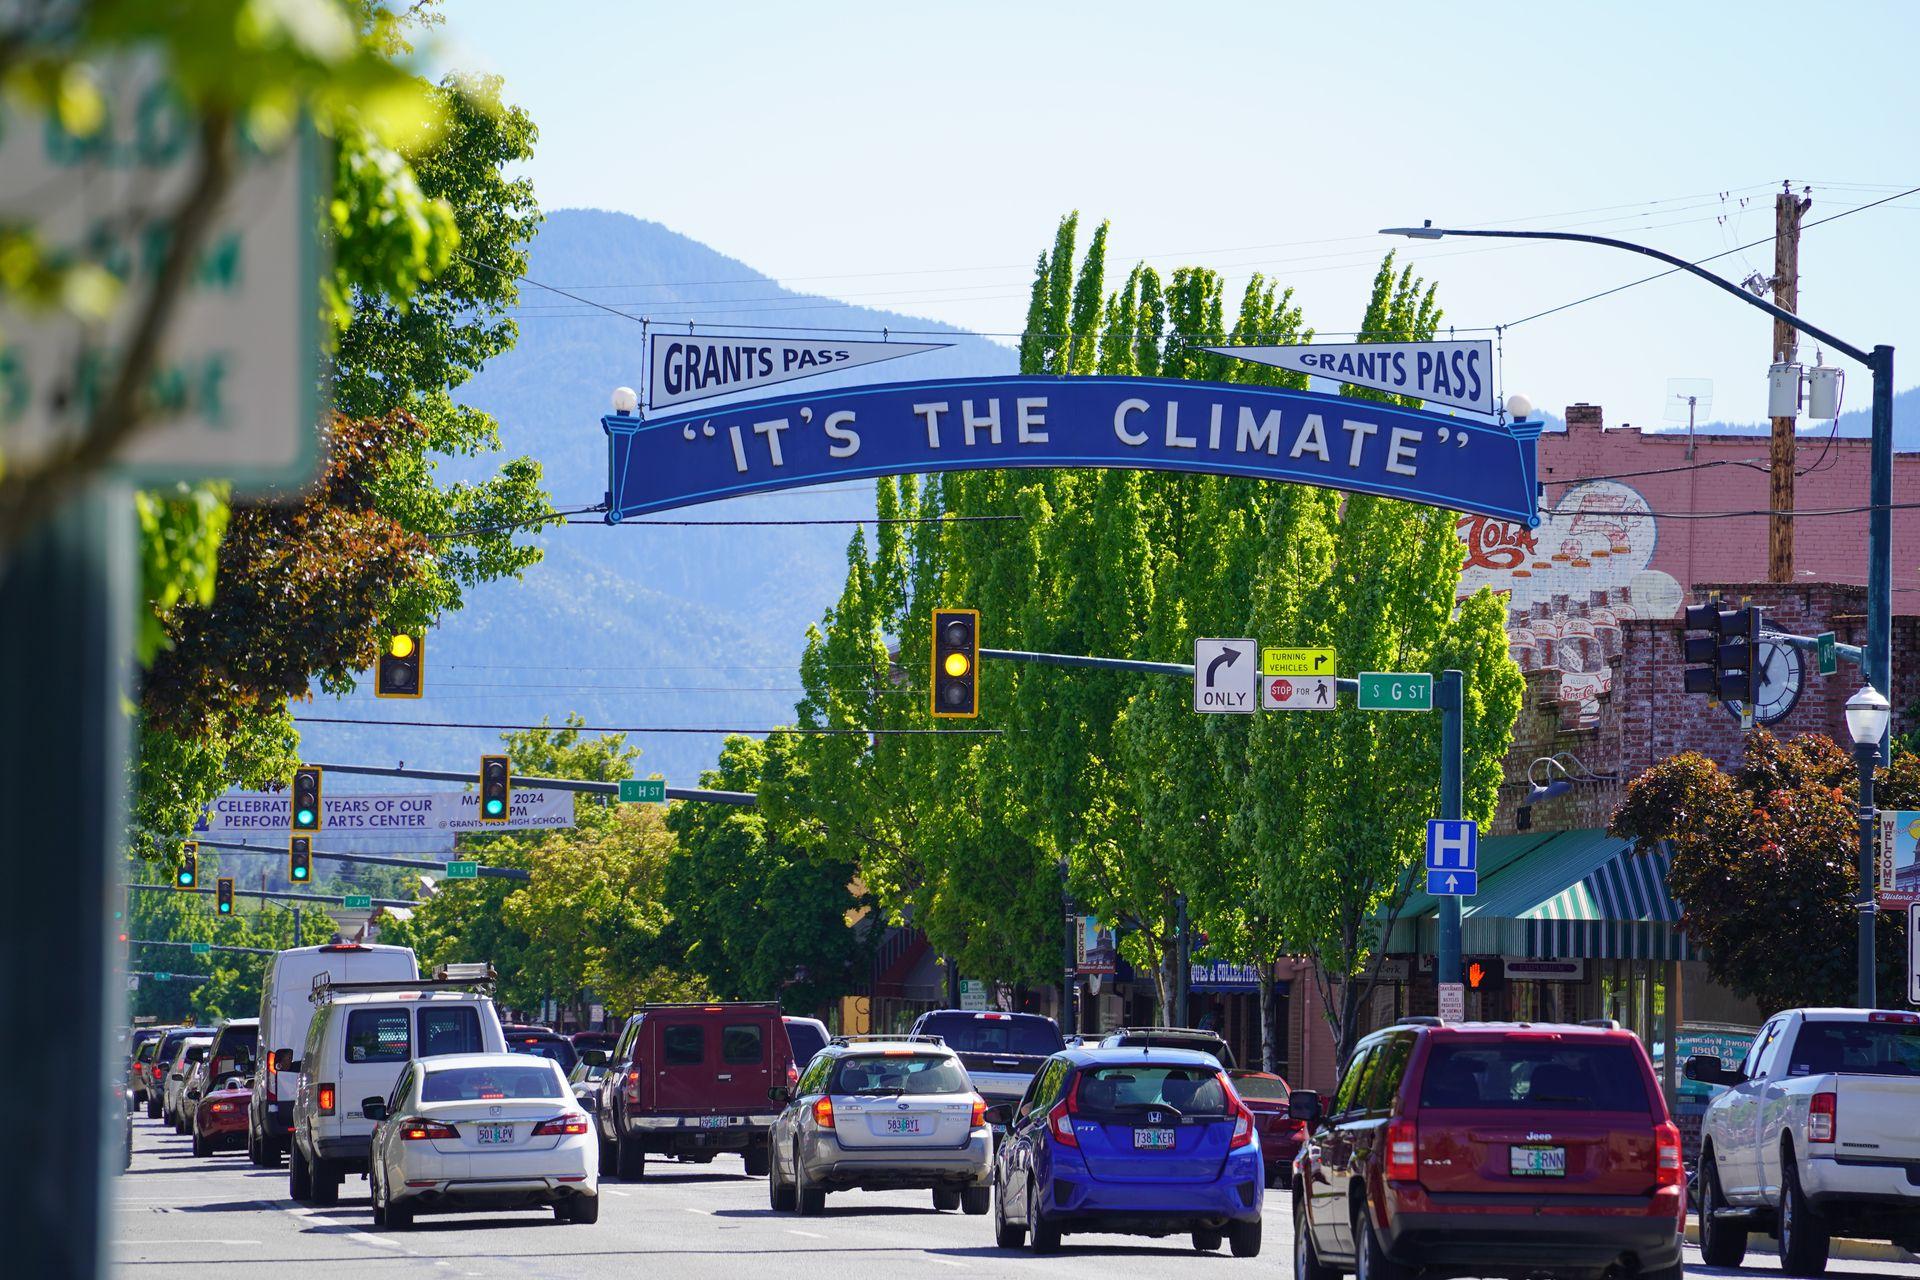 A sign going over the road that reads "It's the Climate" in downtown Grants Pass